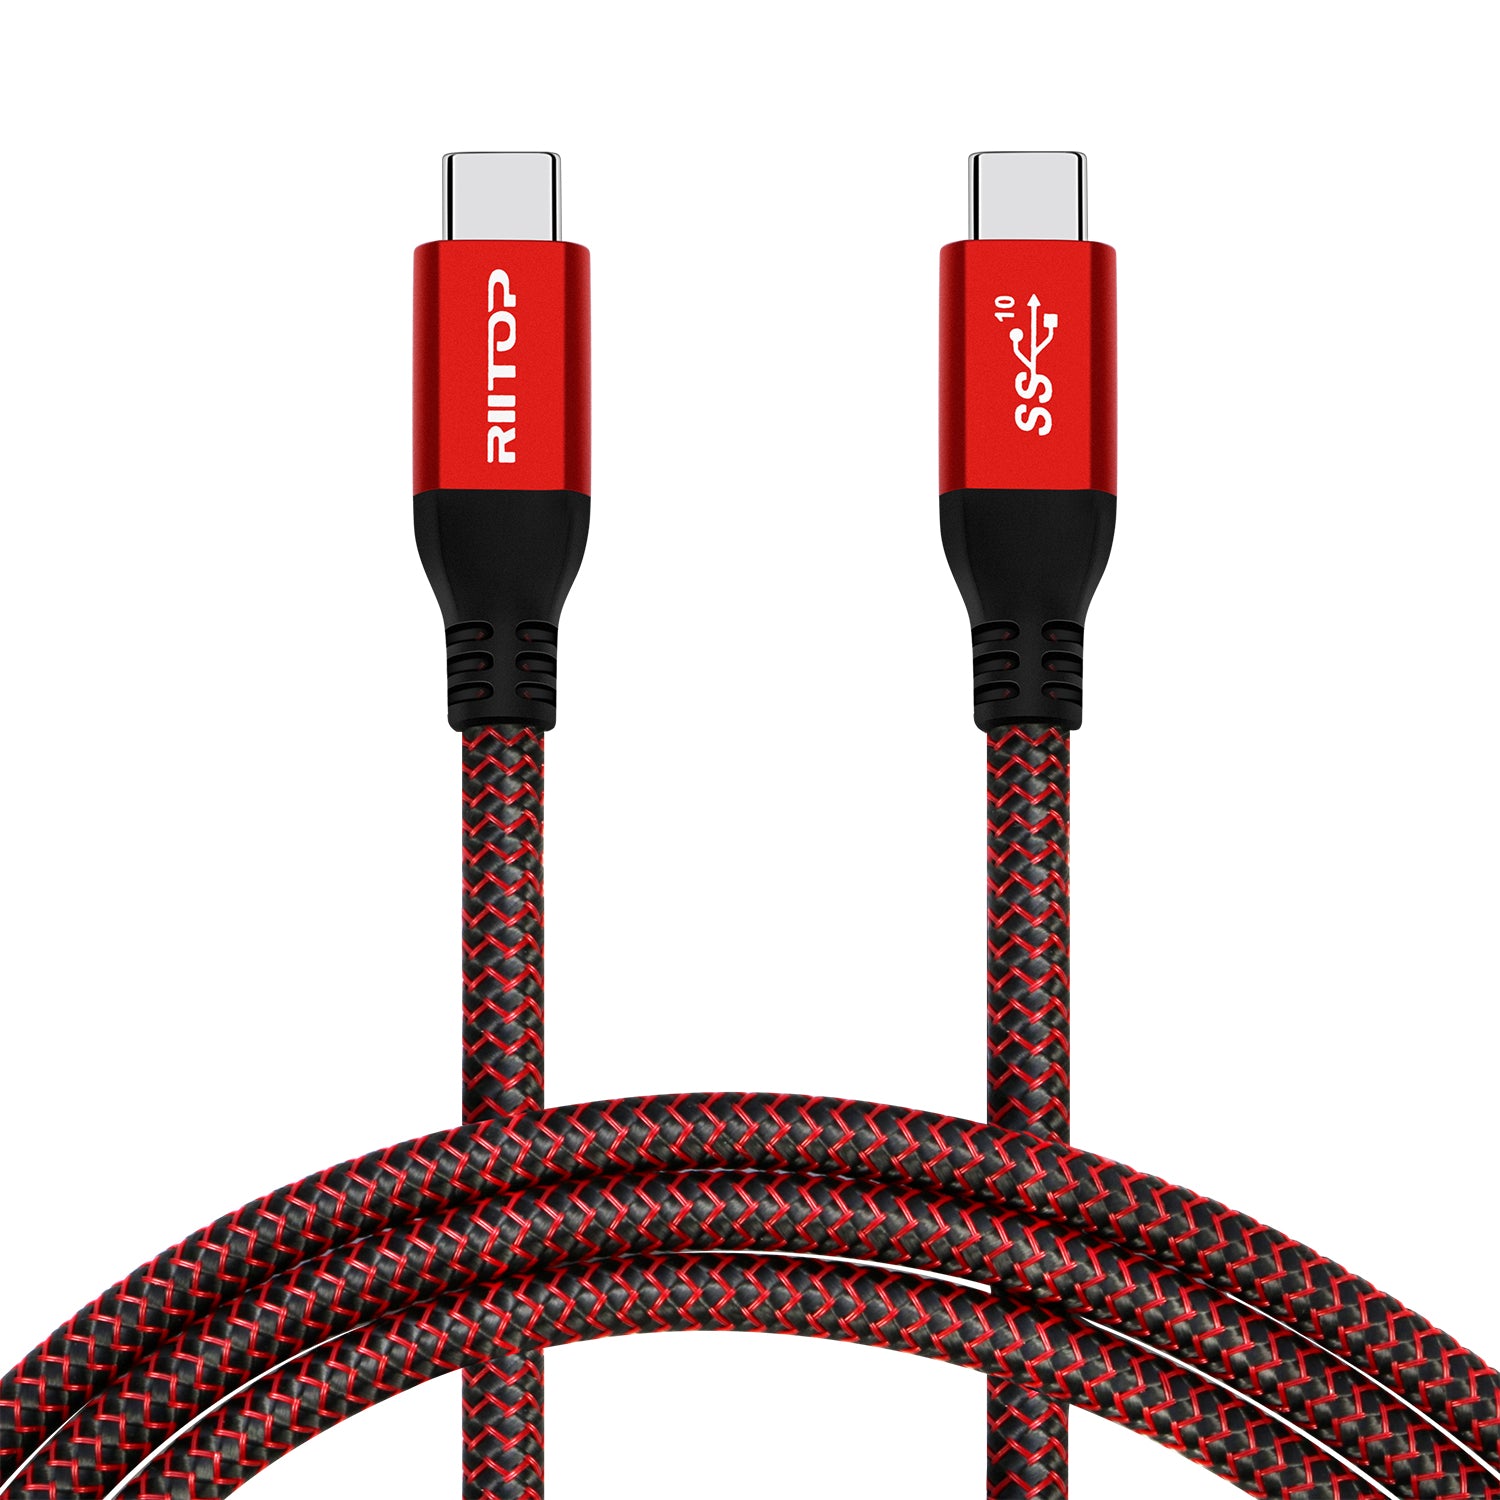 USB C to Cable 100W (5FT), RIITOP USB 3.1 Gen2 Fast